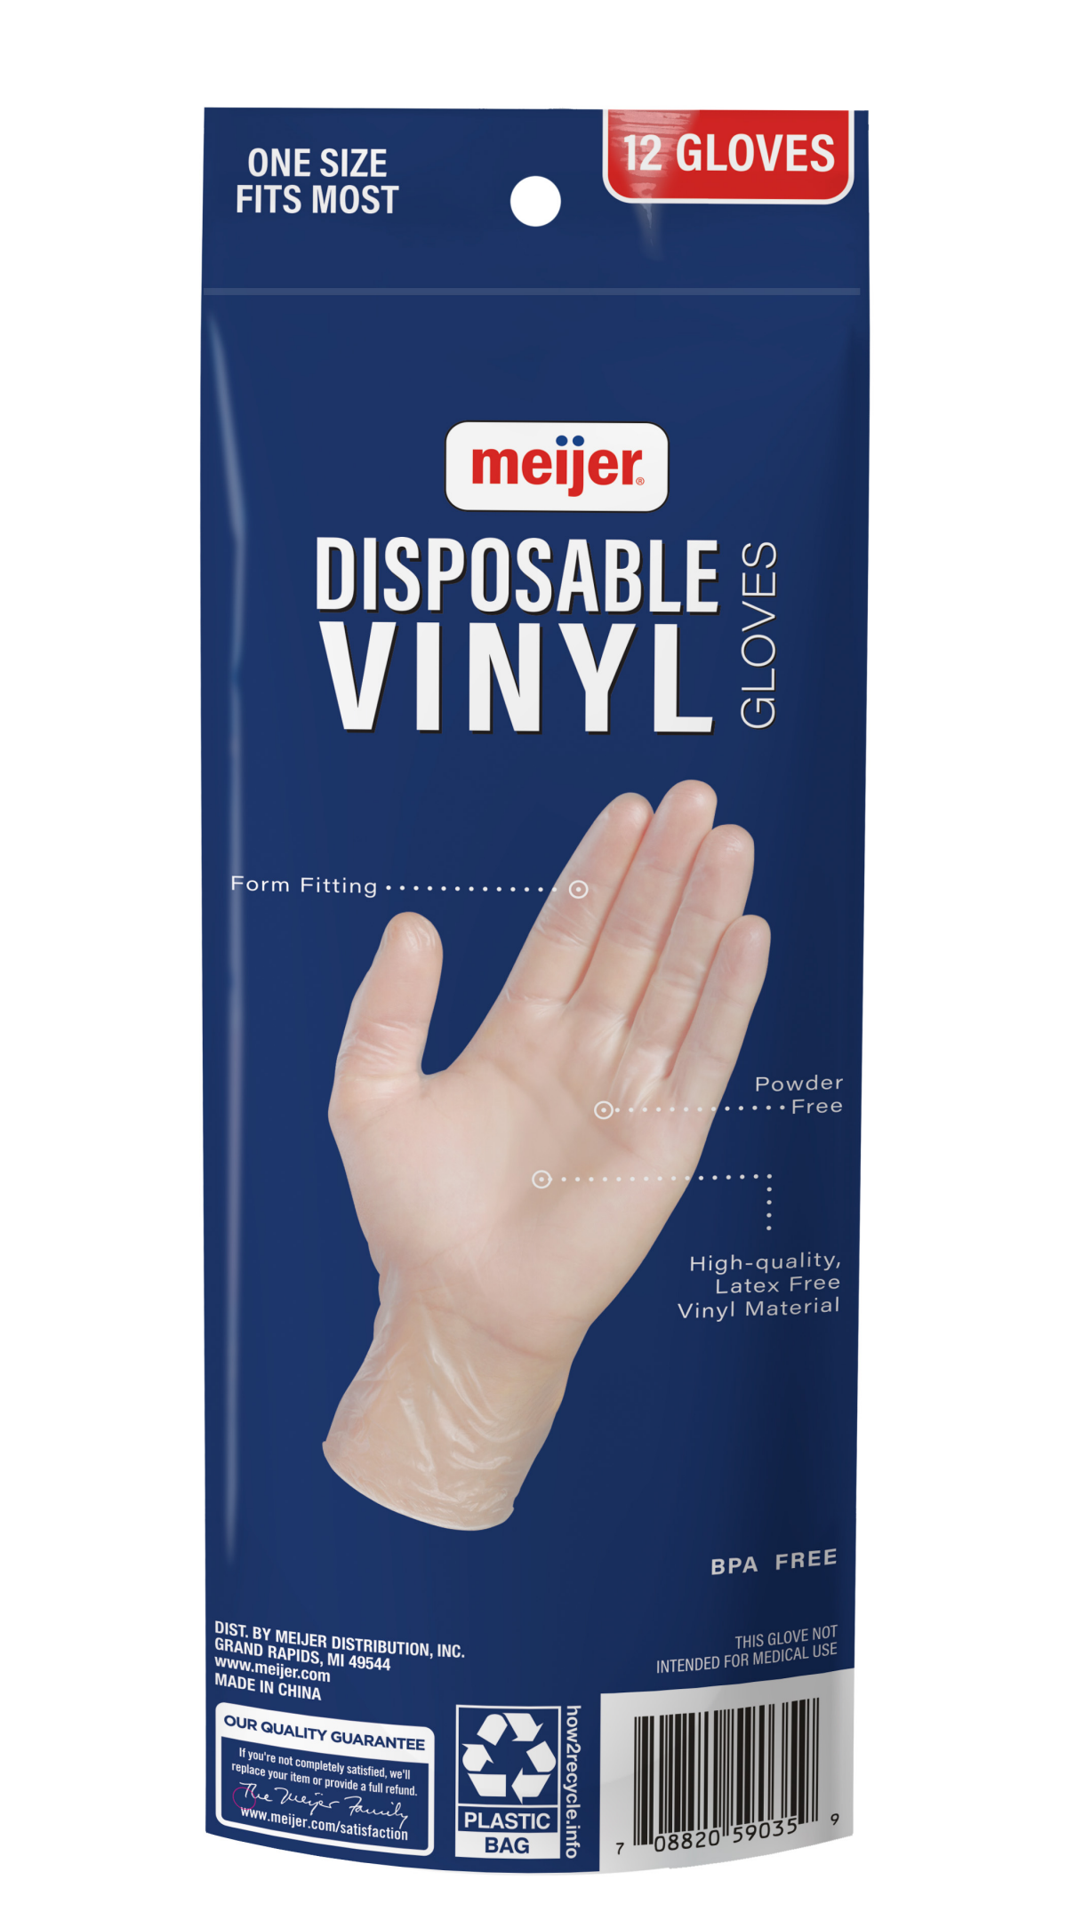 slide 13 of 13, Meijer Disposable Vinyl Gloves One Size Fits Most, 12 ct